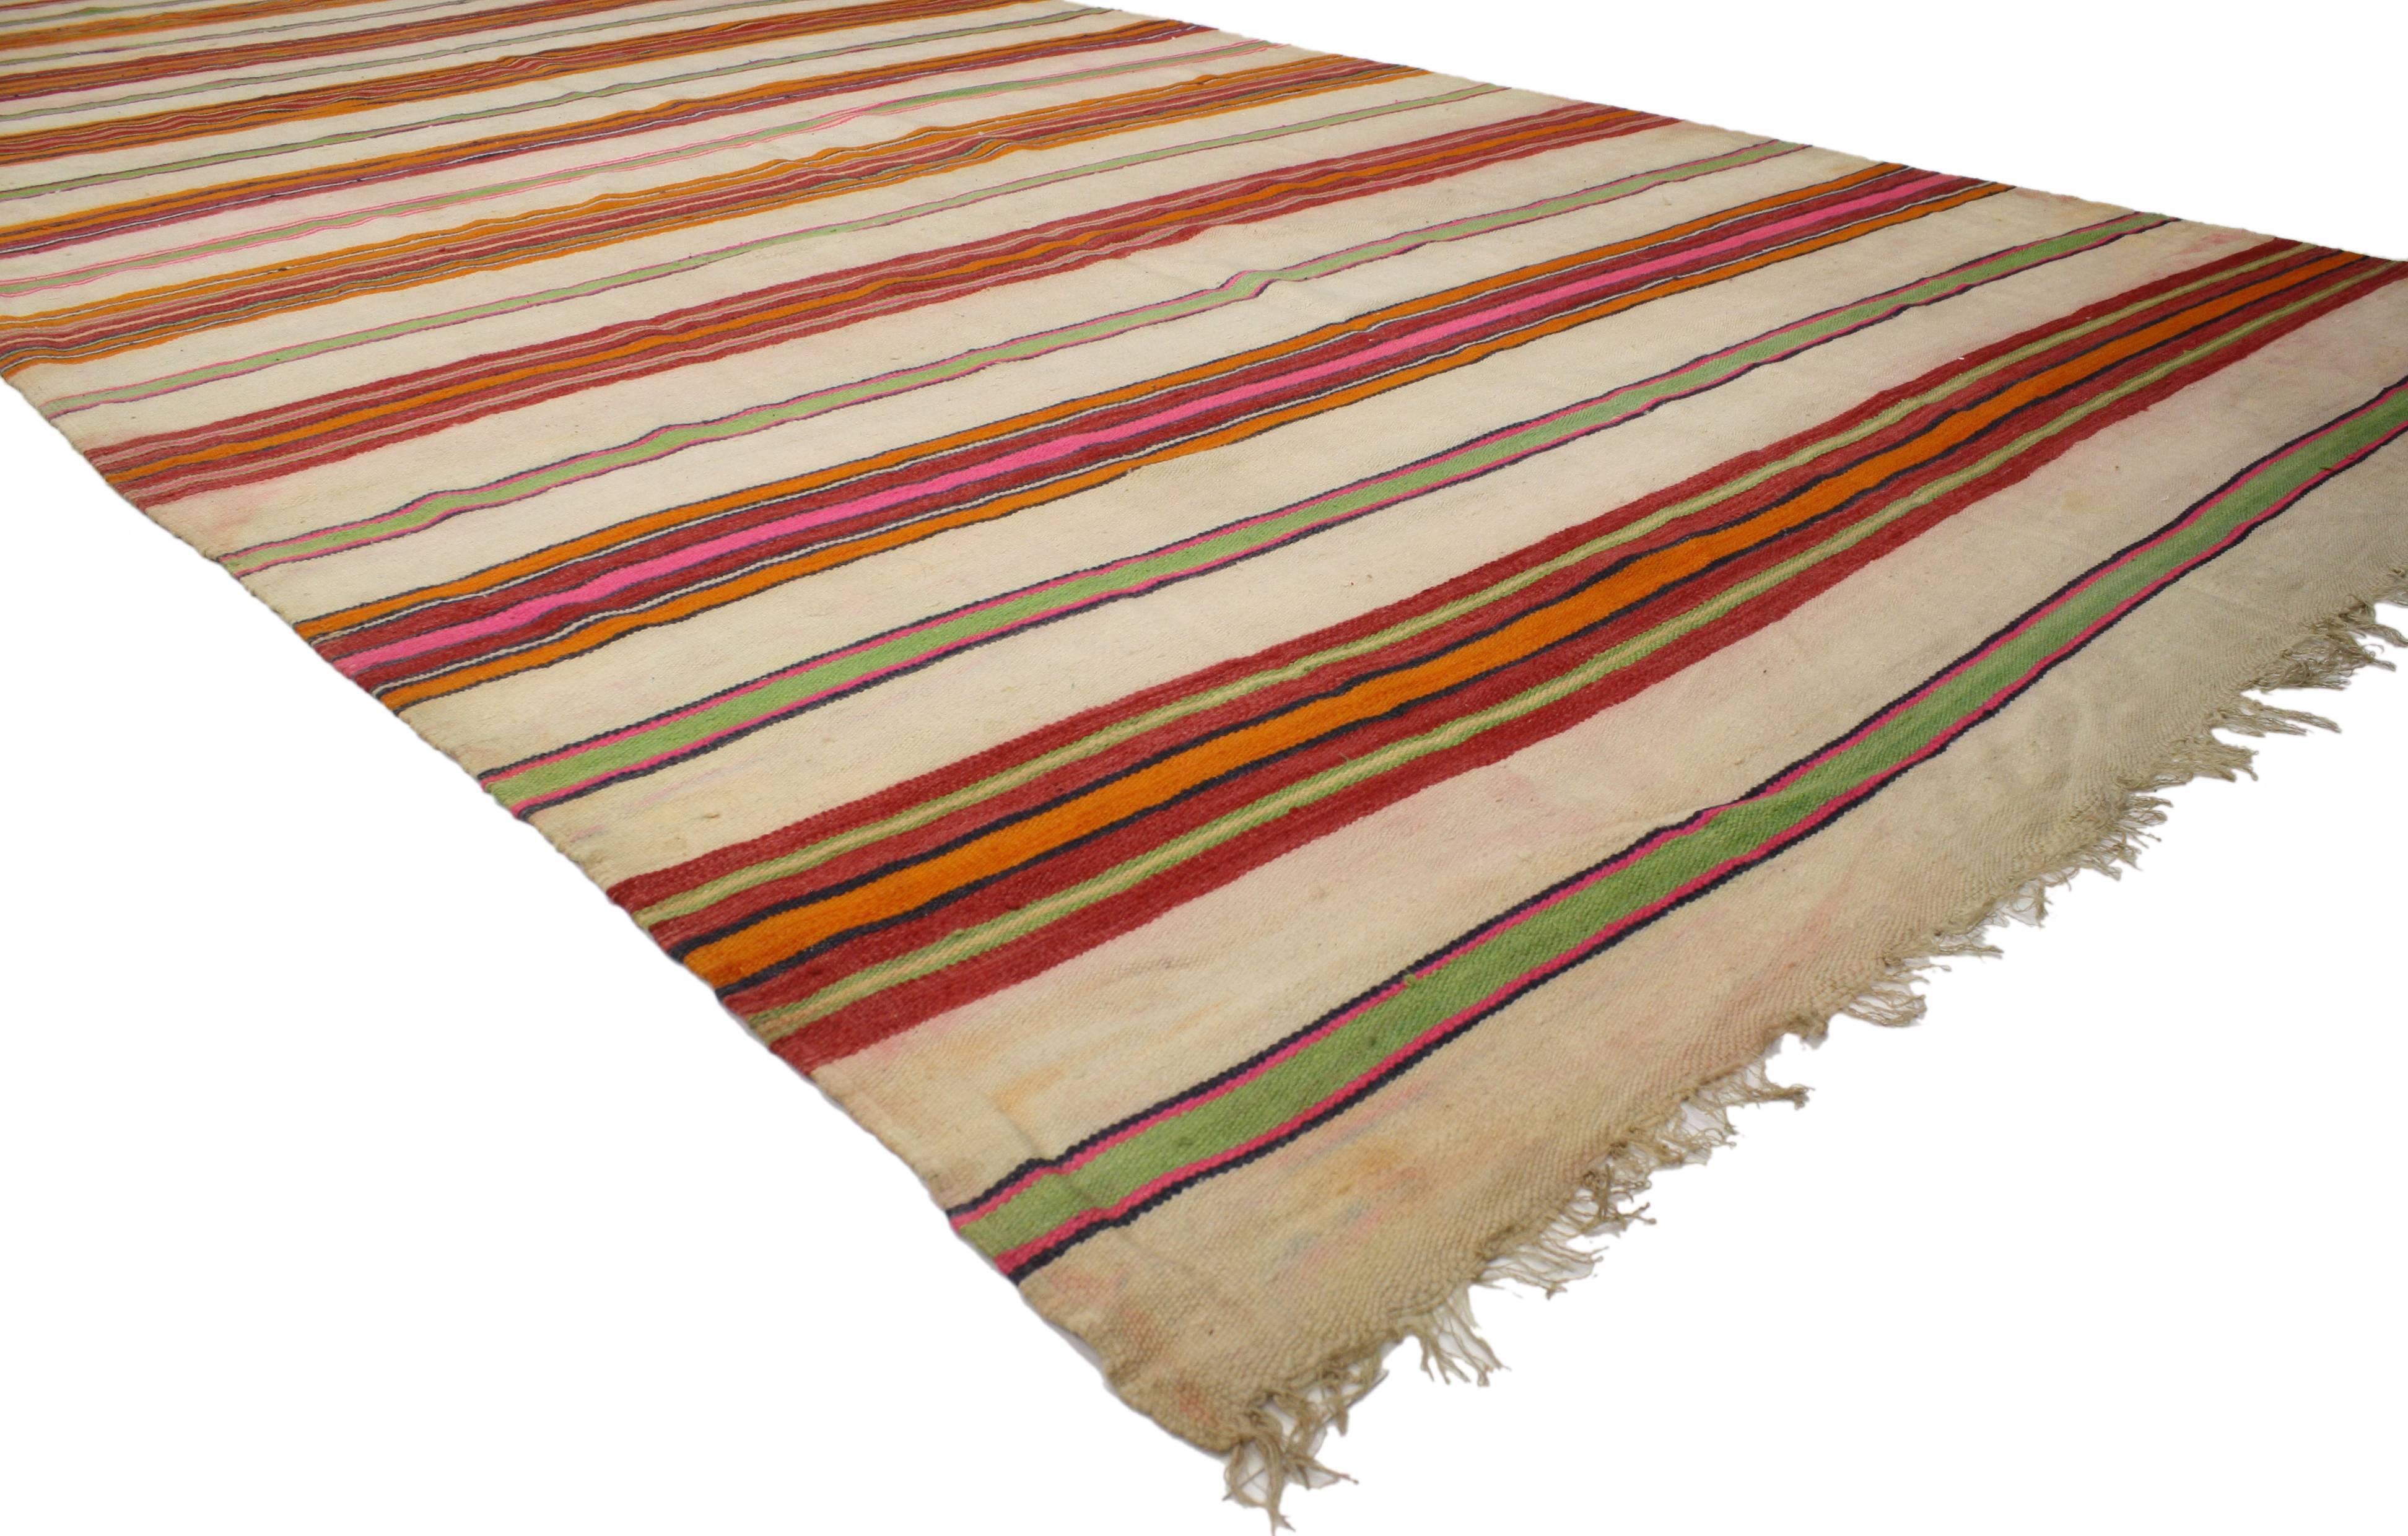 Vintage Berber Moroccan Striped Kilim Rug with Tribal Boho Chic Style In Good Condition For Sale In Dallas, TX